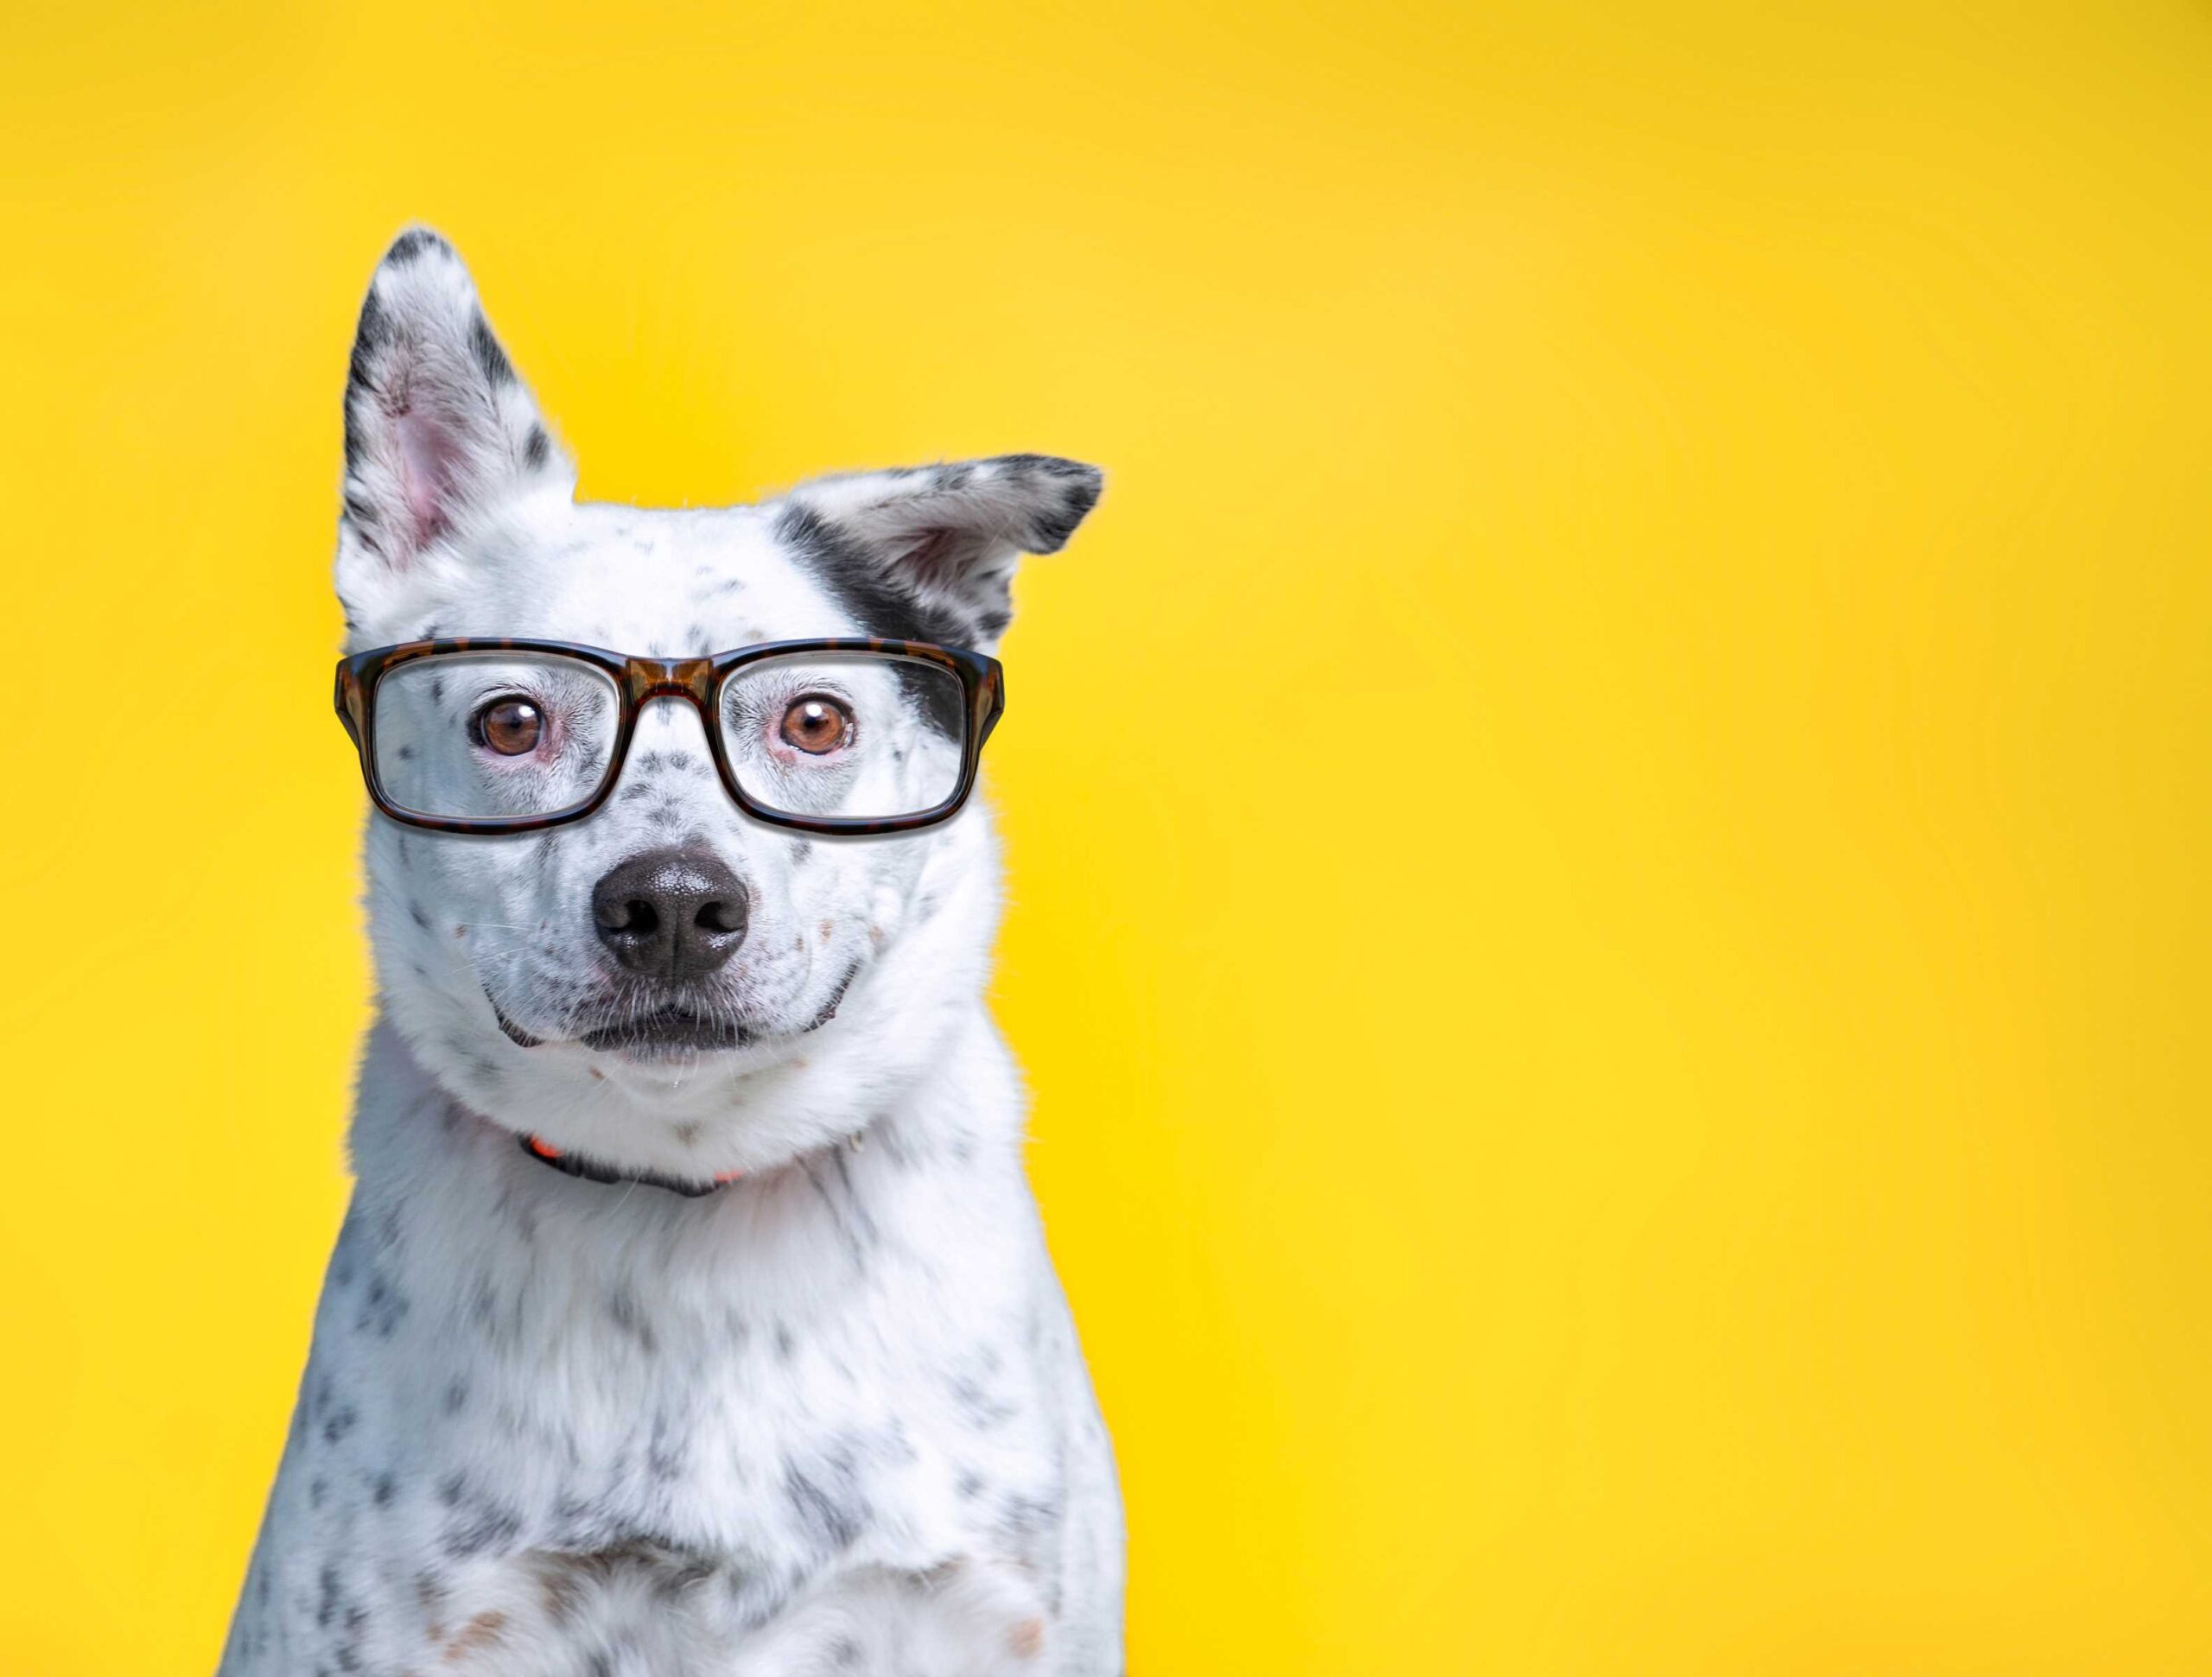 Image of a black and white dog wearing glasses on an orange background